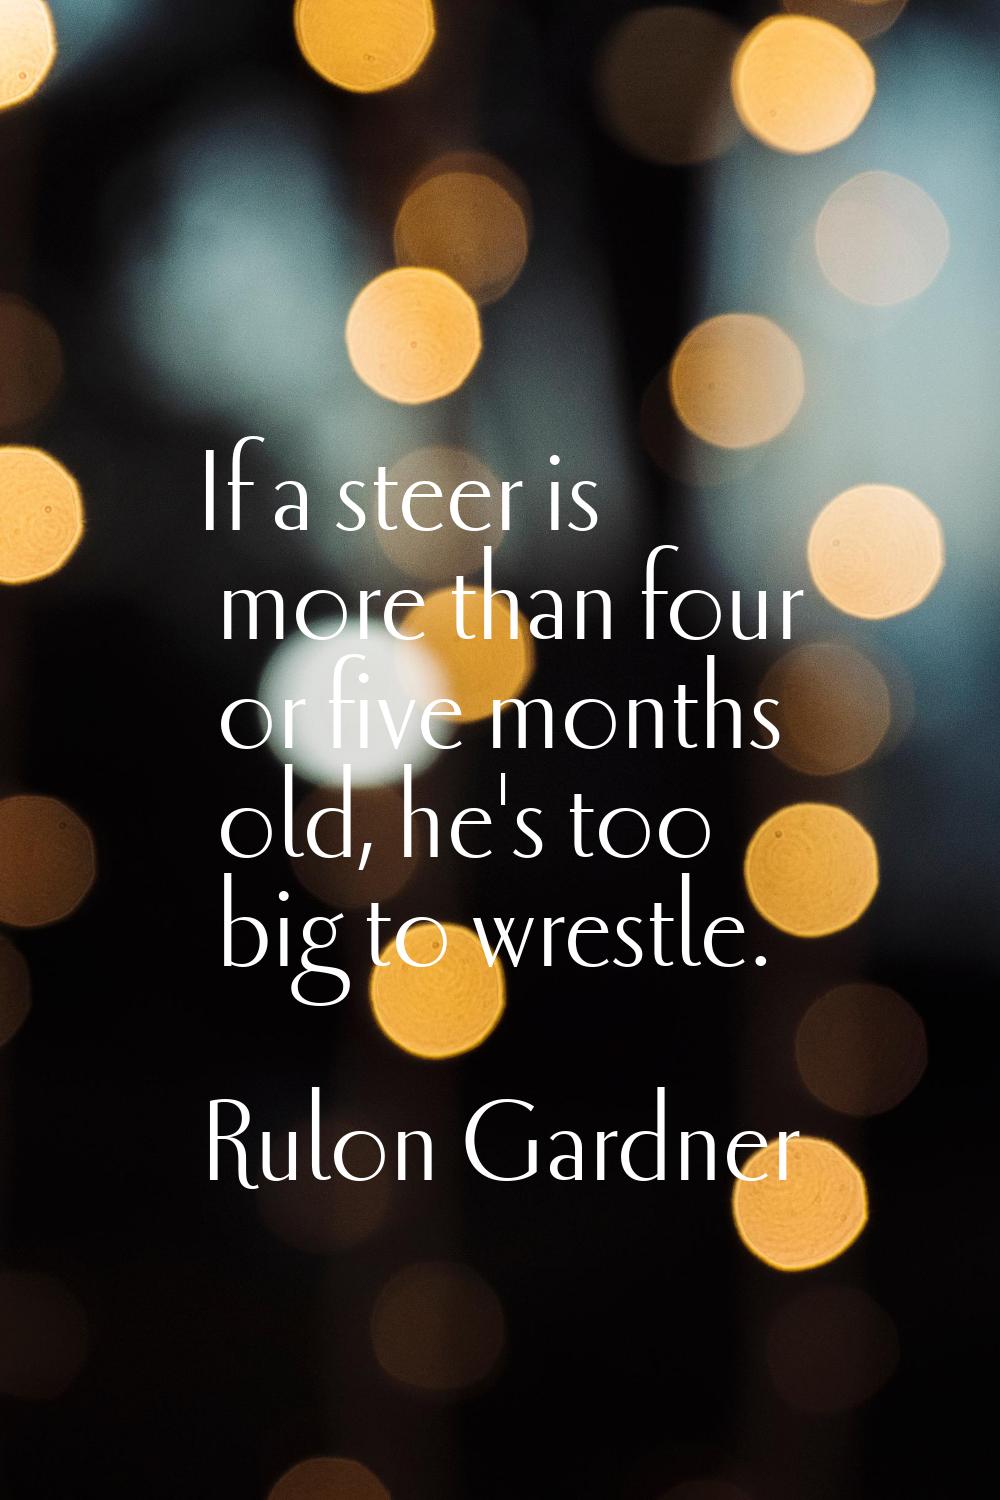 If a steer is more than four or five months old, he's too big to wrestle.